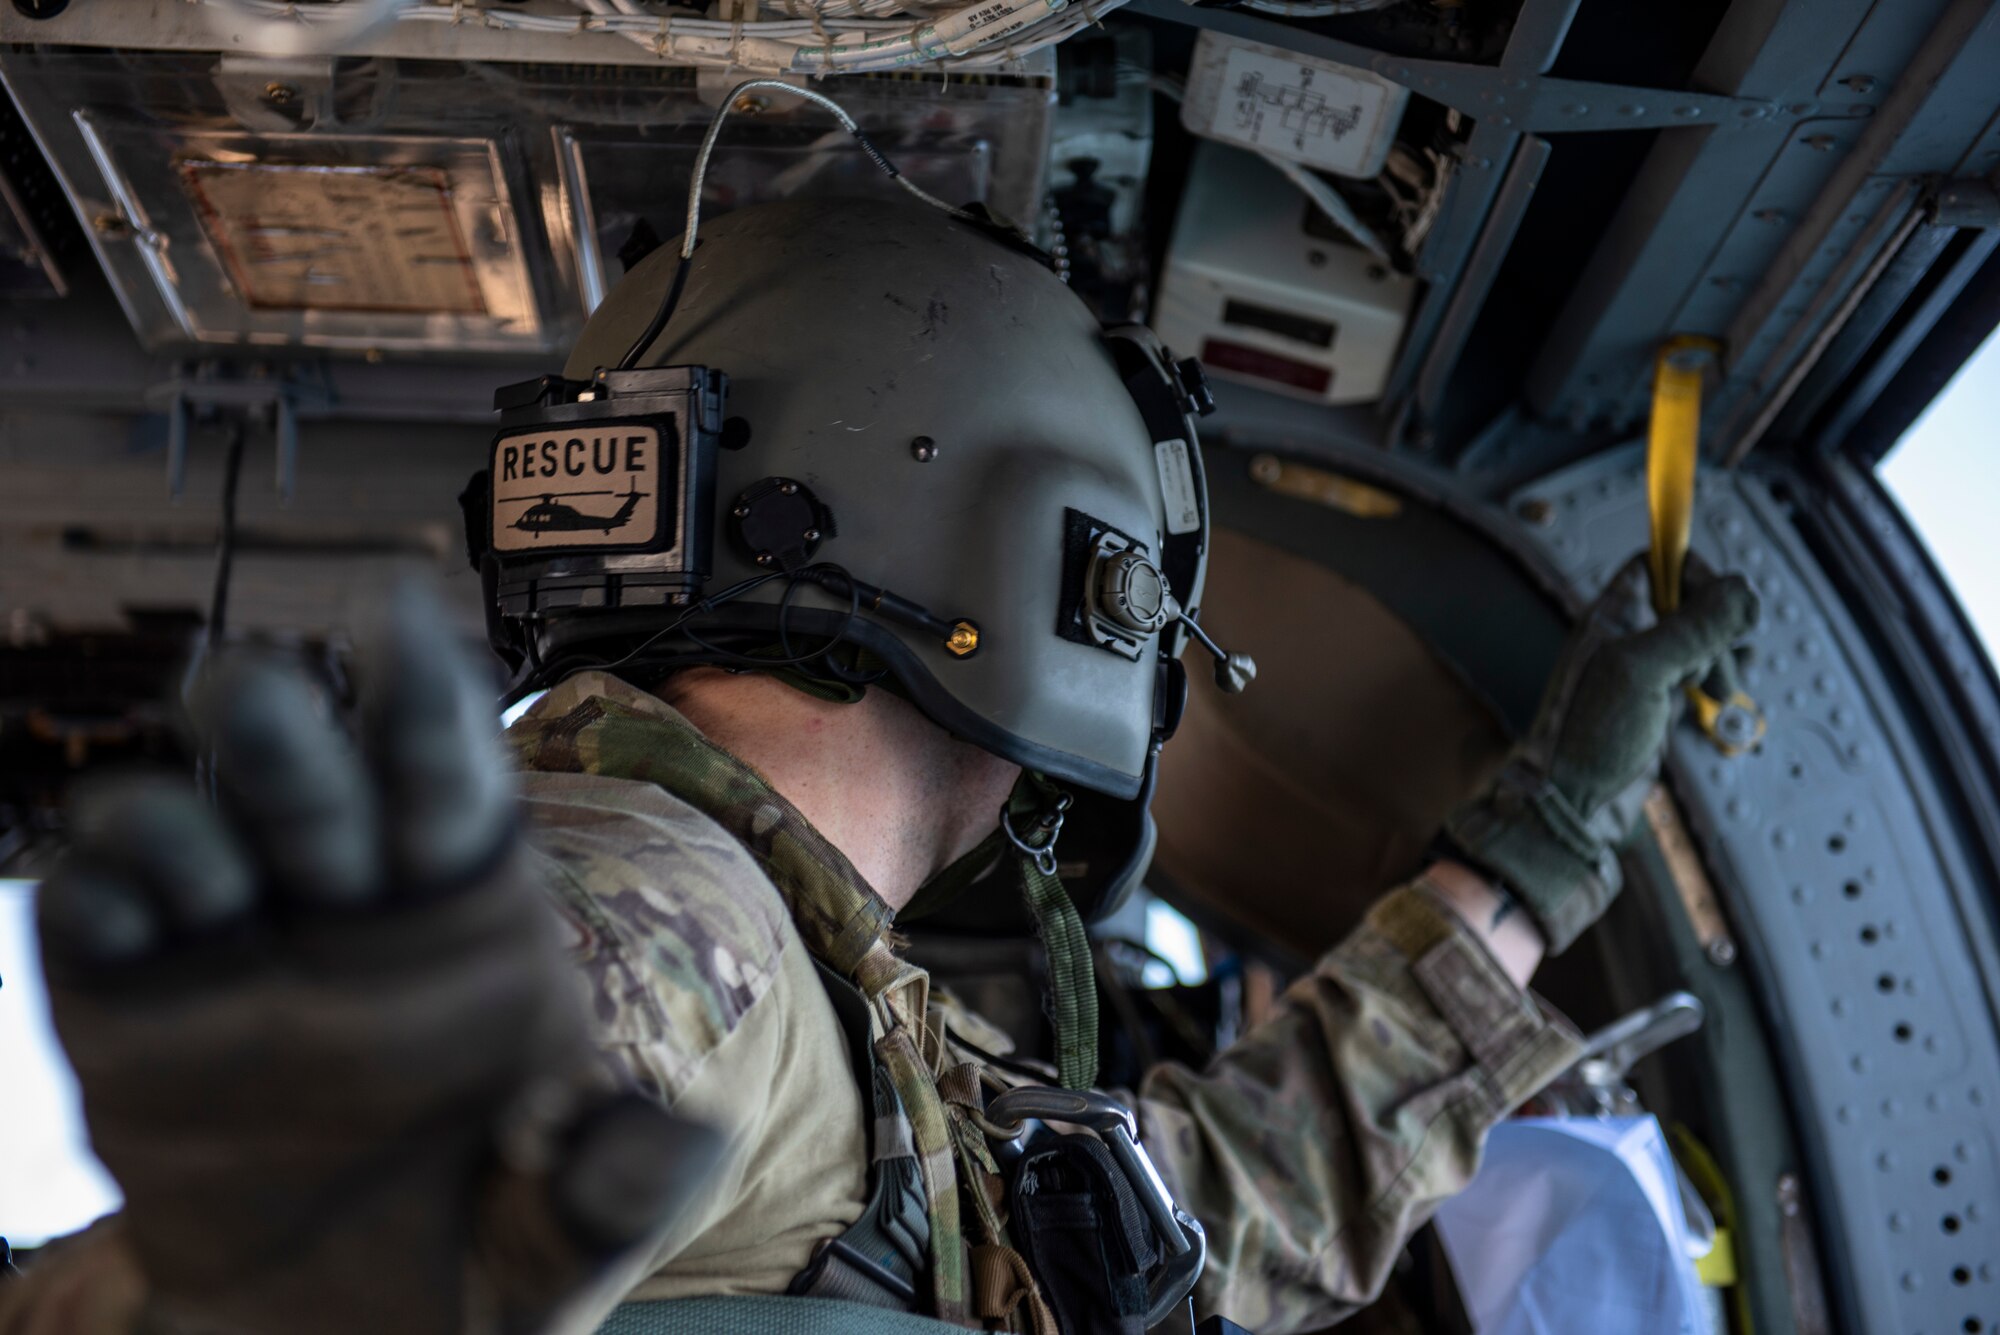 Senior Airman Gaige Clidinst, 33rd Rescue Squadron special missions aviator, searches for the rescue subject during a combat search and rescue training event